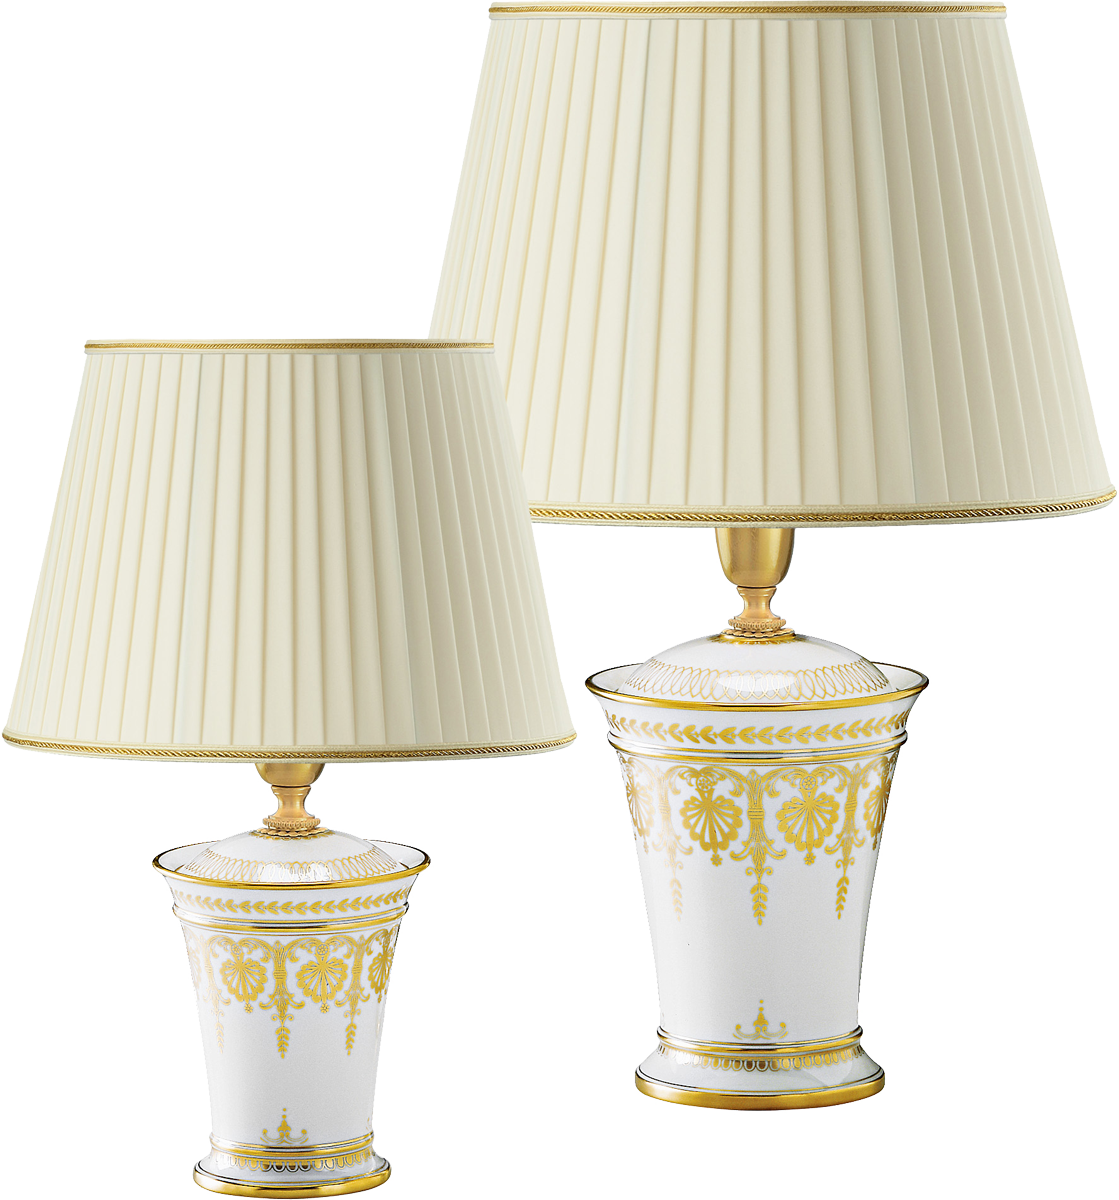 TABLE LAMP 4149